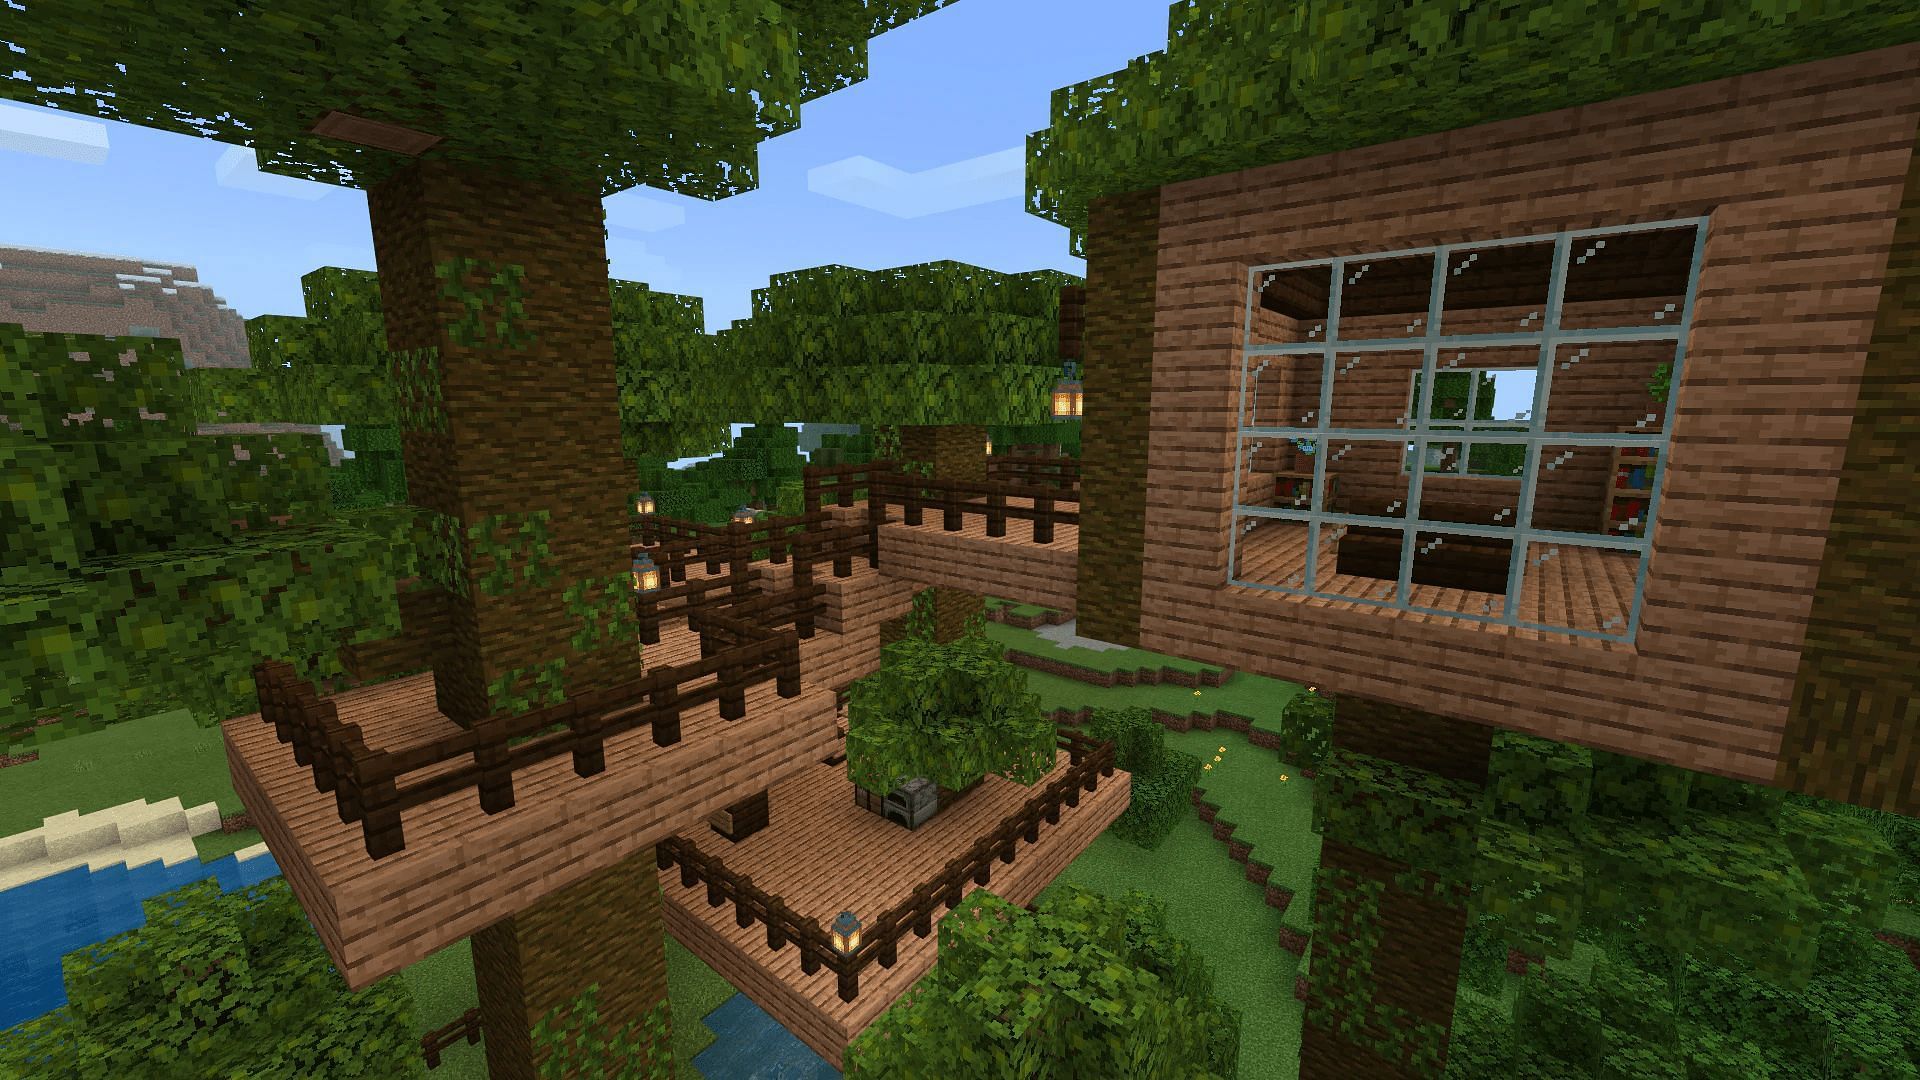 If a player can build it, they can survive in it (Image via Gartzke/Minecraft.net)